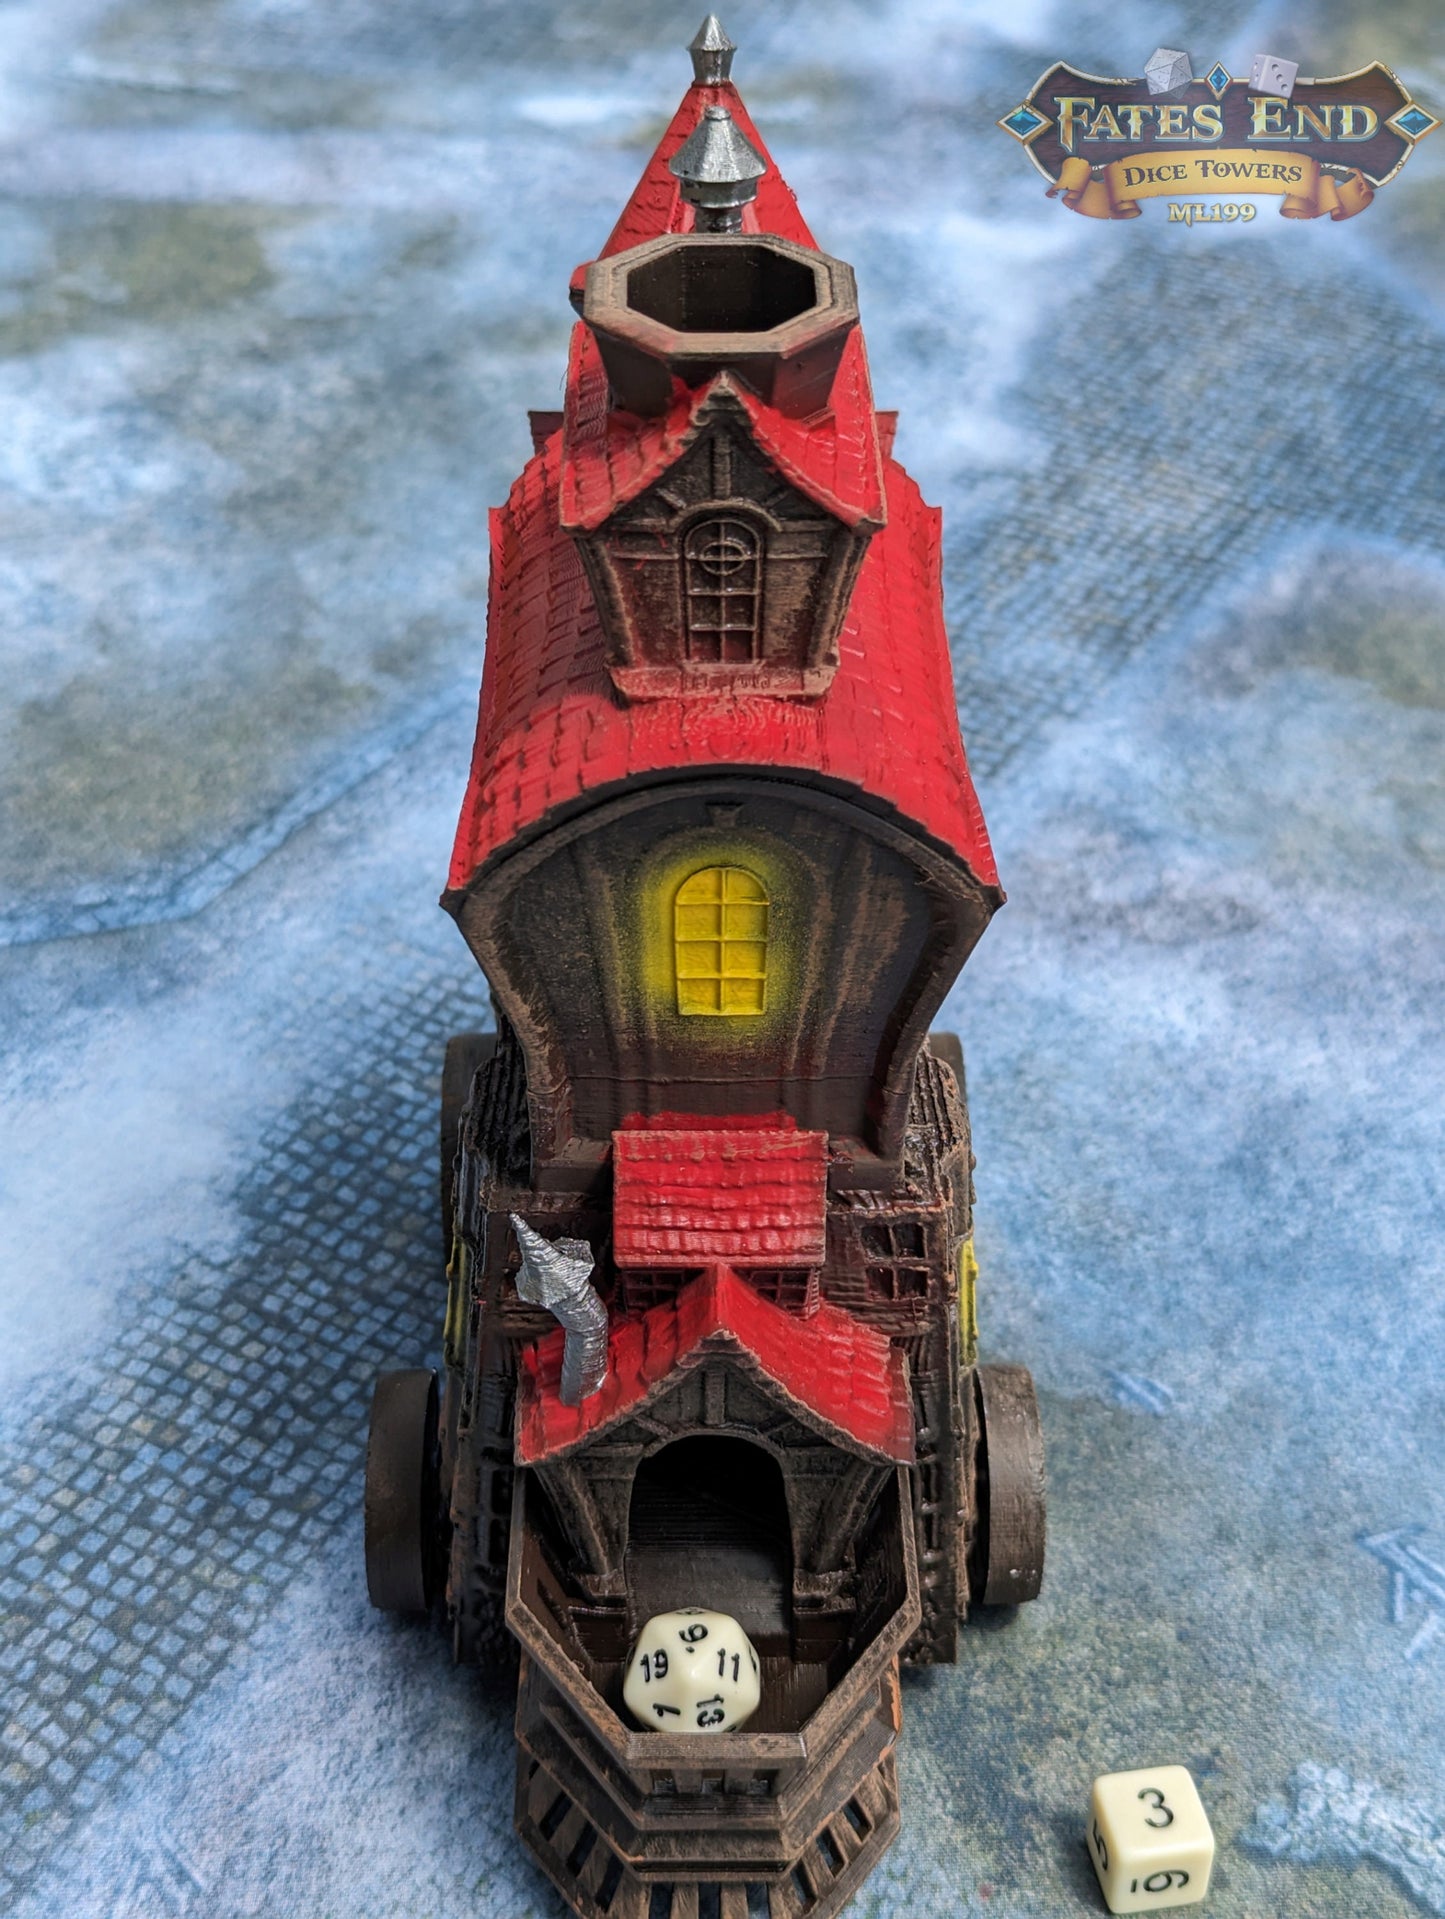 Merchant's Dice Tower-Fate's End